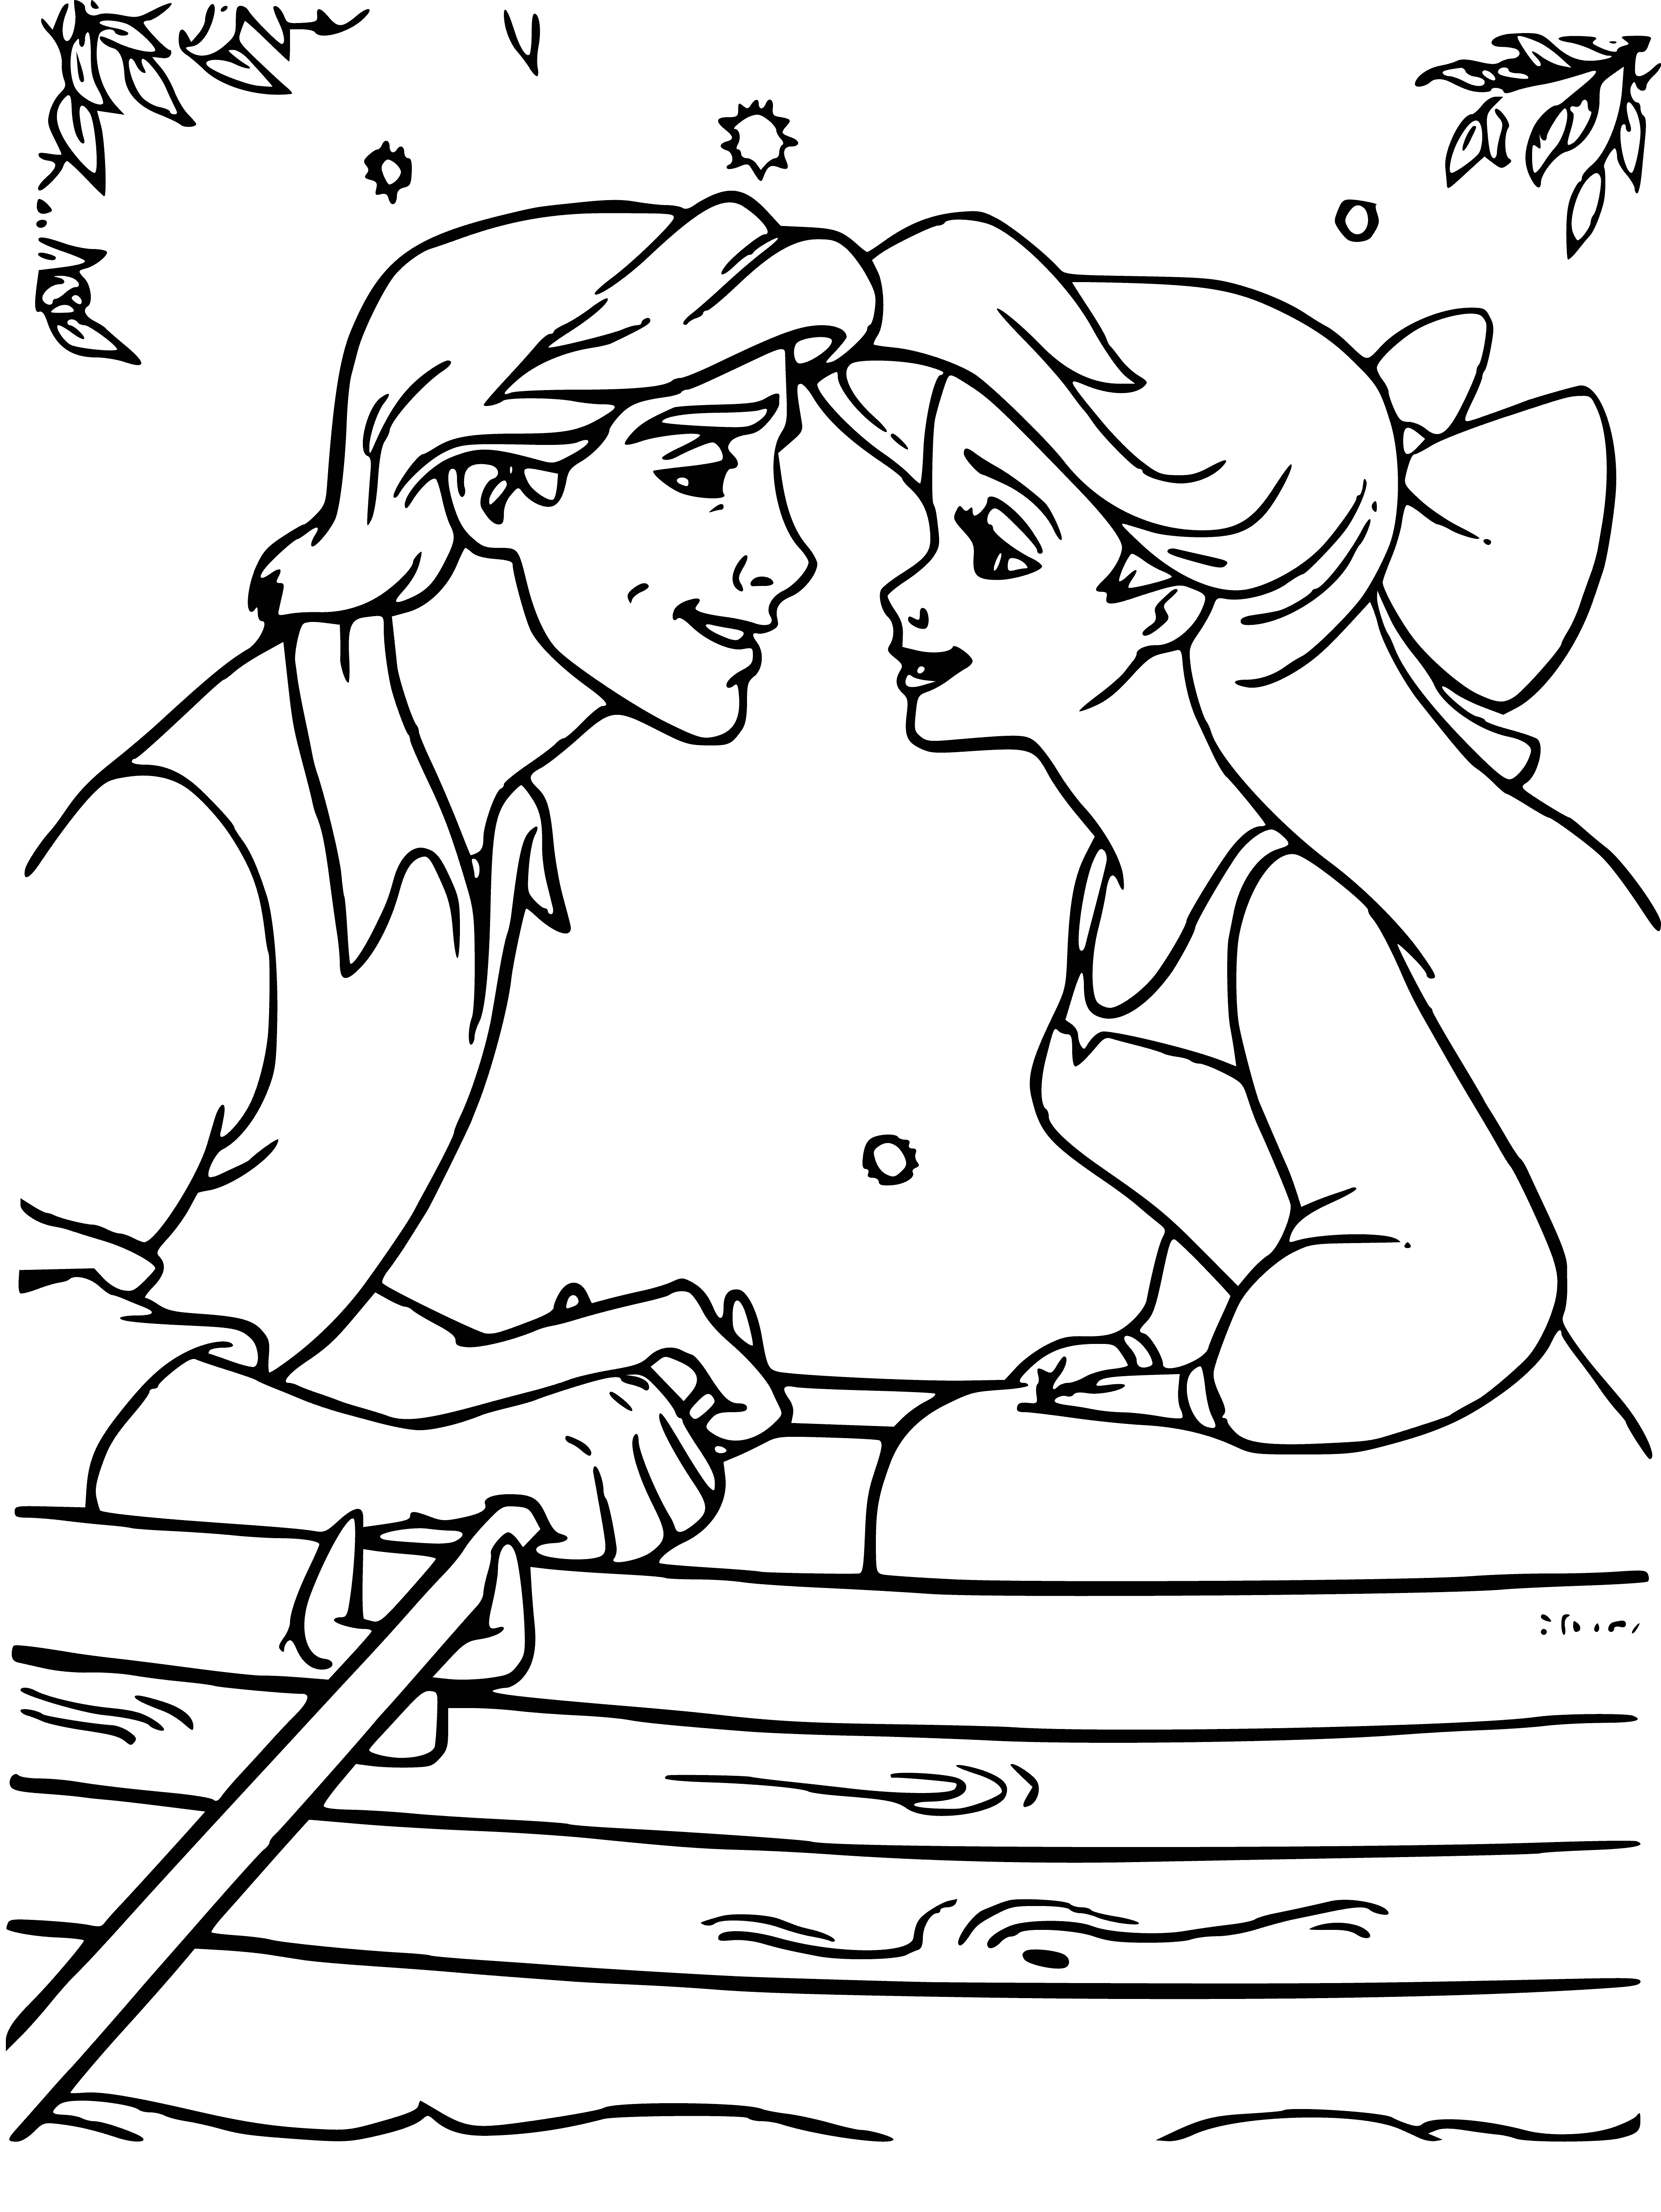 coloring page: Little girl with long hair and a tail is underwater wearing a crown and star necklace, holding a conch shell, with a shy and uncertain expression.